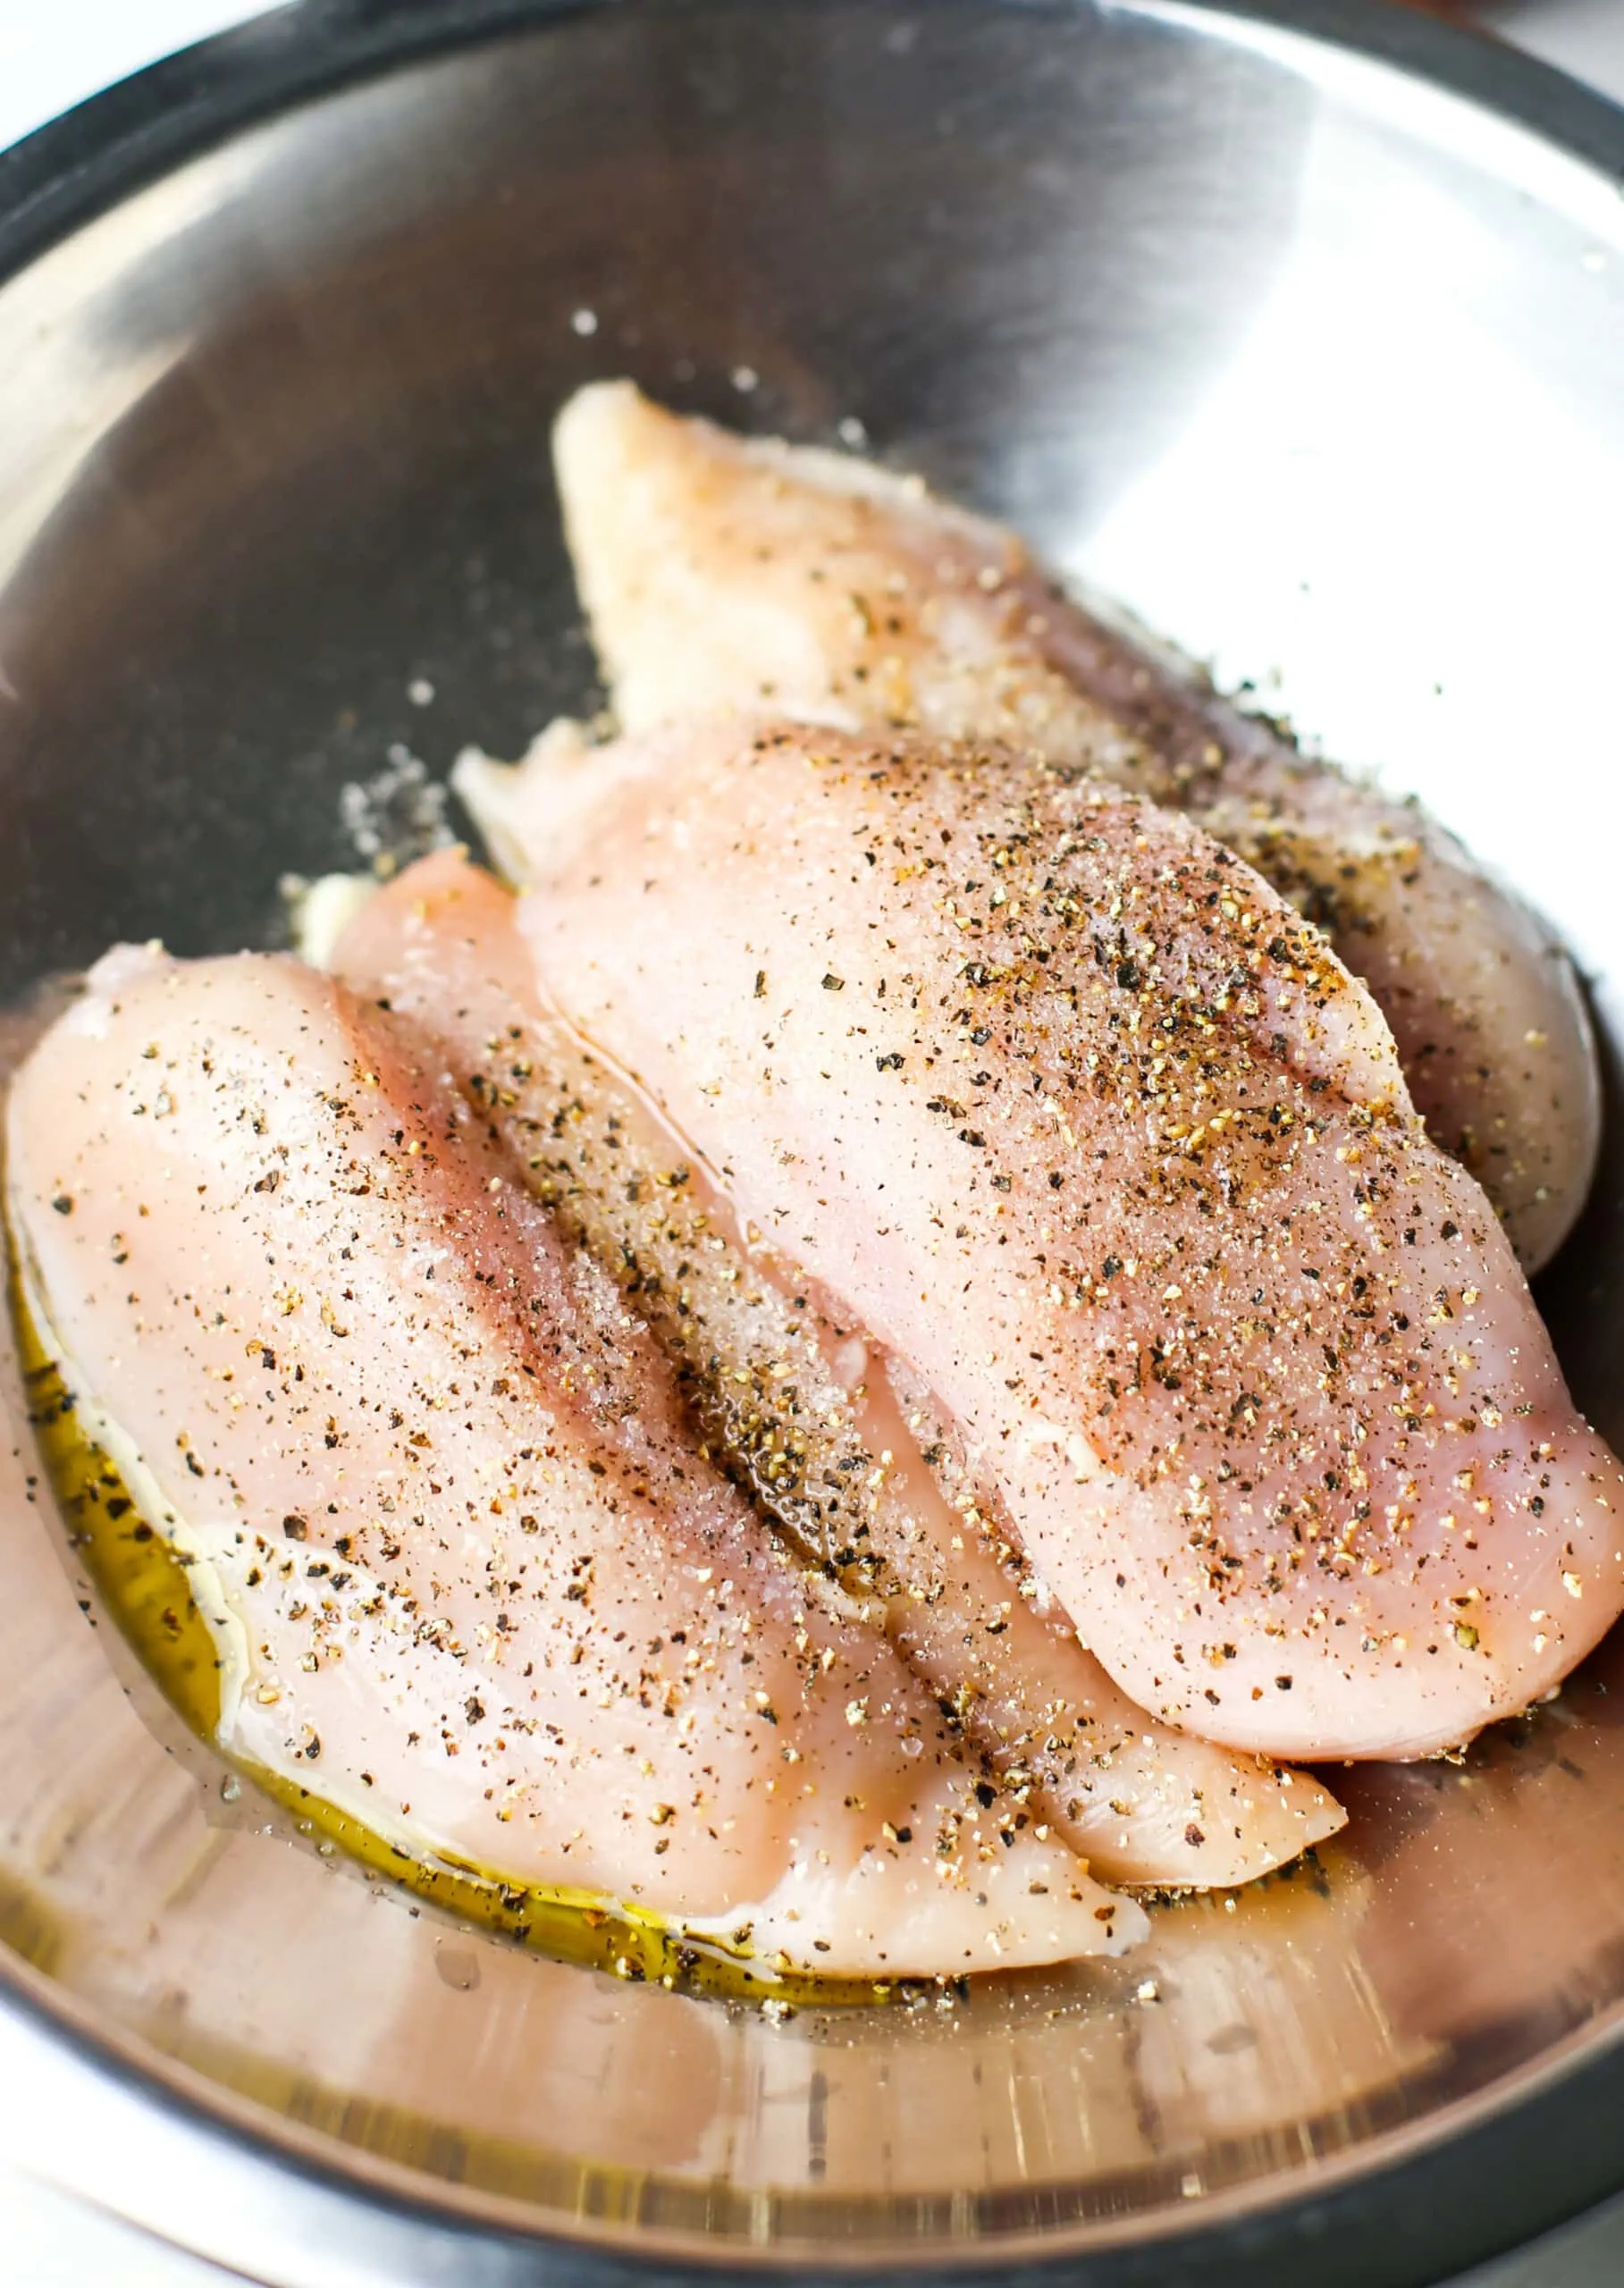 Four raw seasoned chicken breasts in a stainless steel bowl.